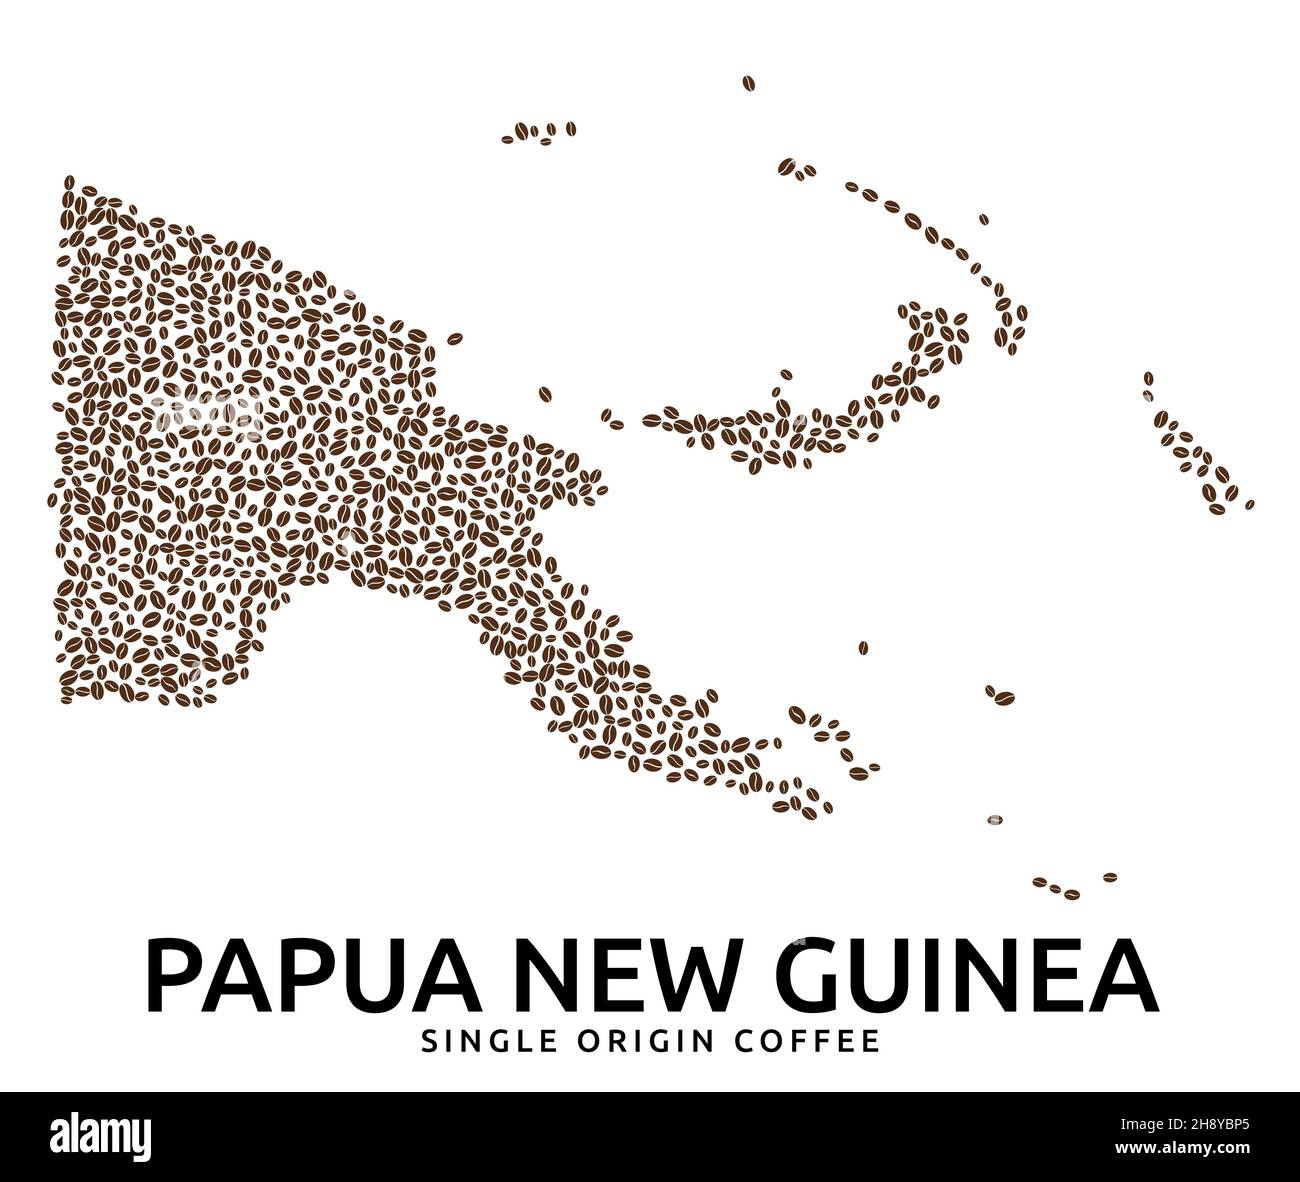 Shape of Papua New Guinea map made of scattered coffee beans, country name below Stock Vector